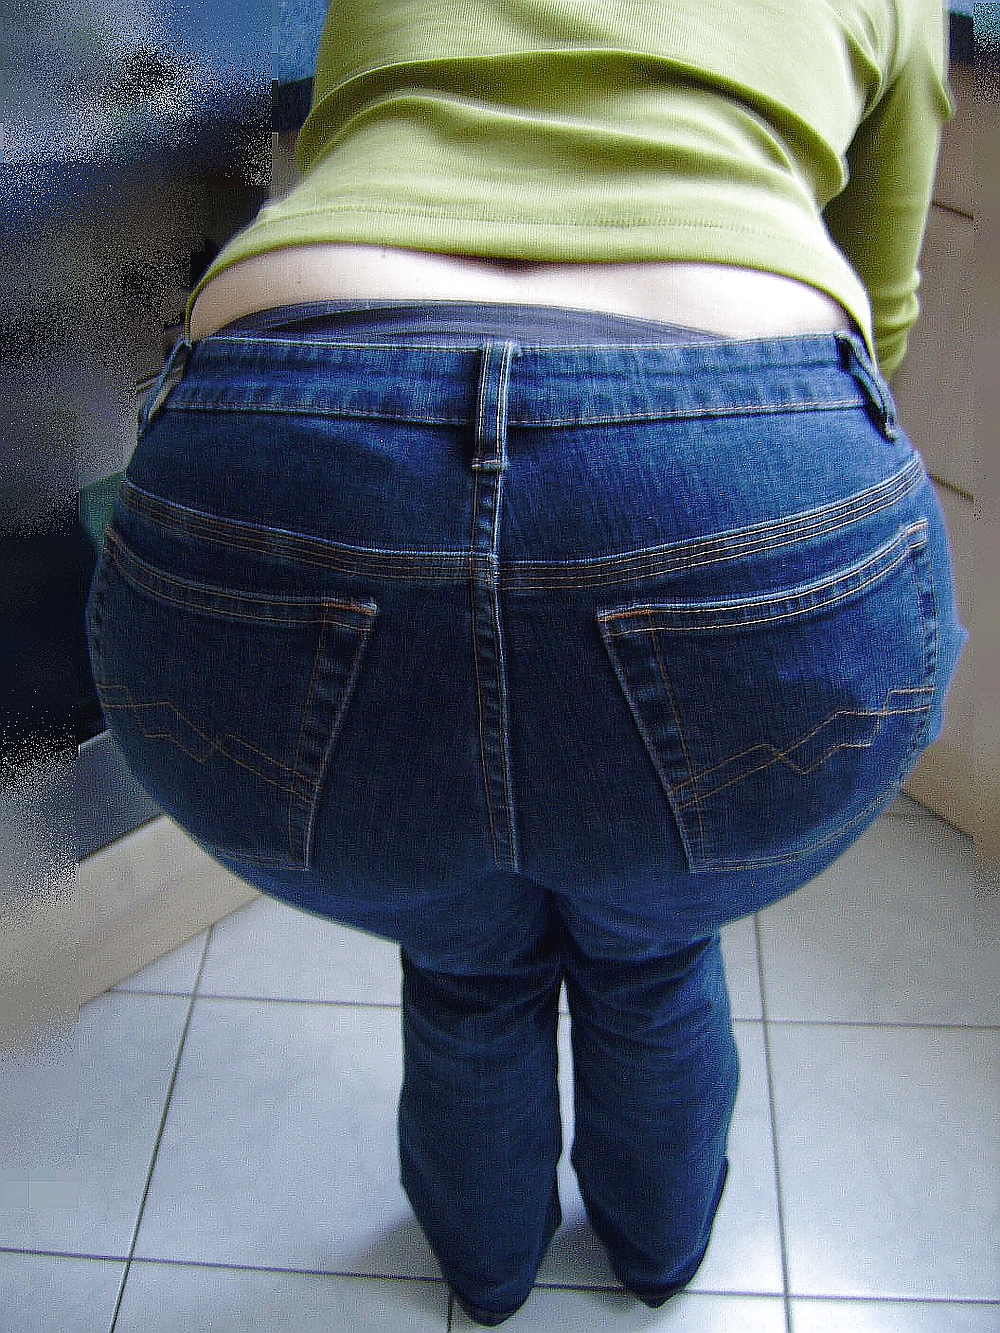 Big firm mature ass in jeans #22593386